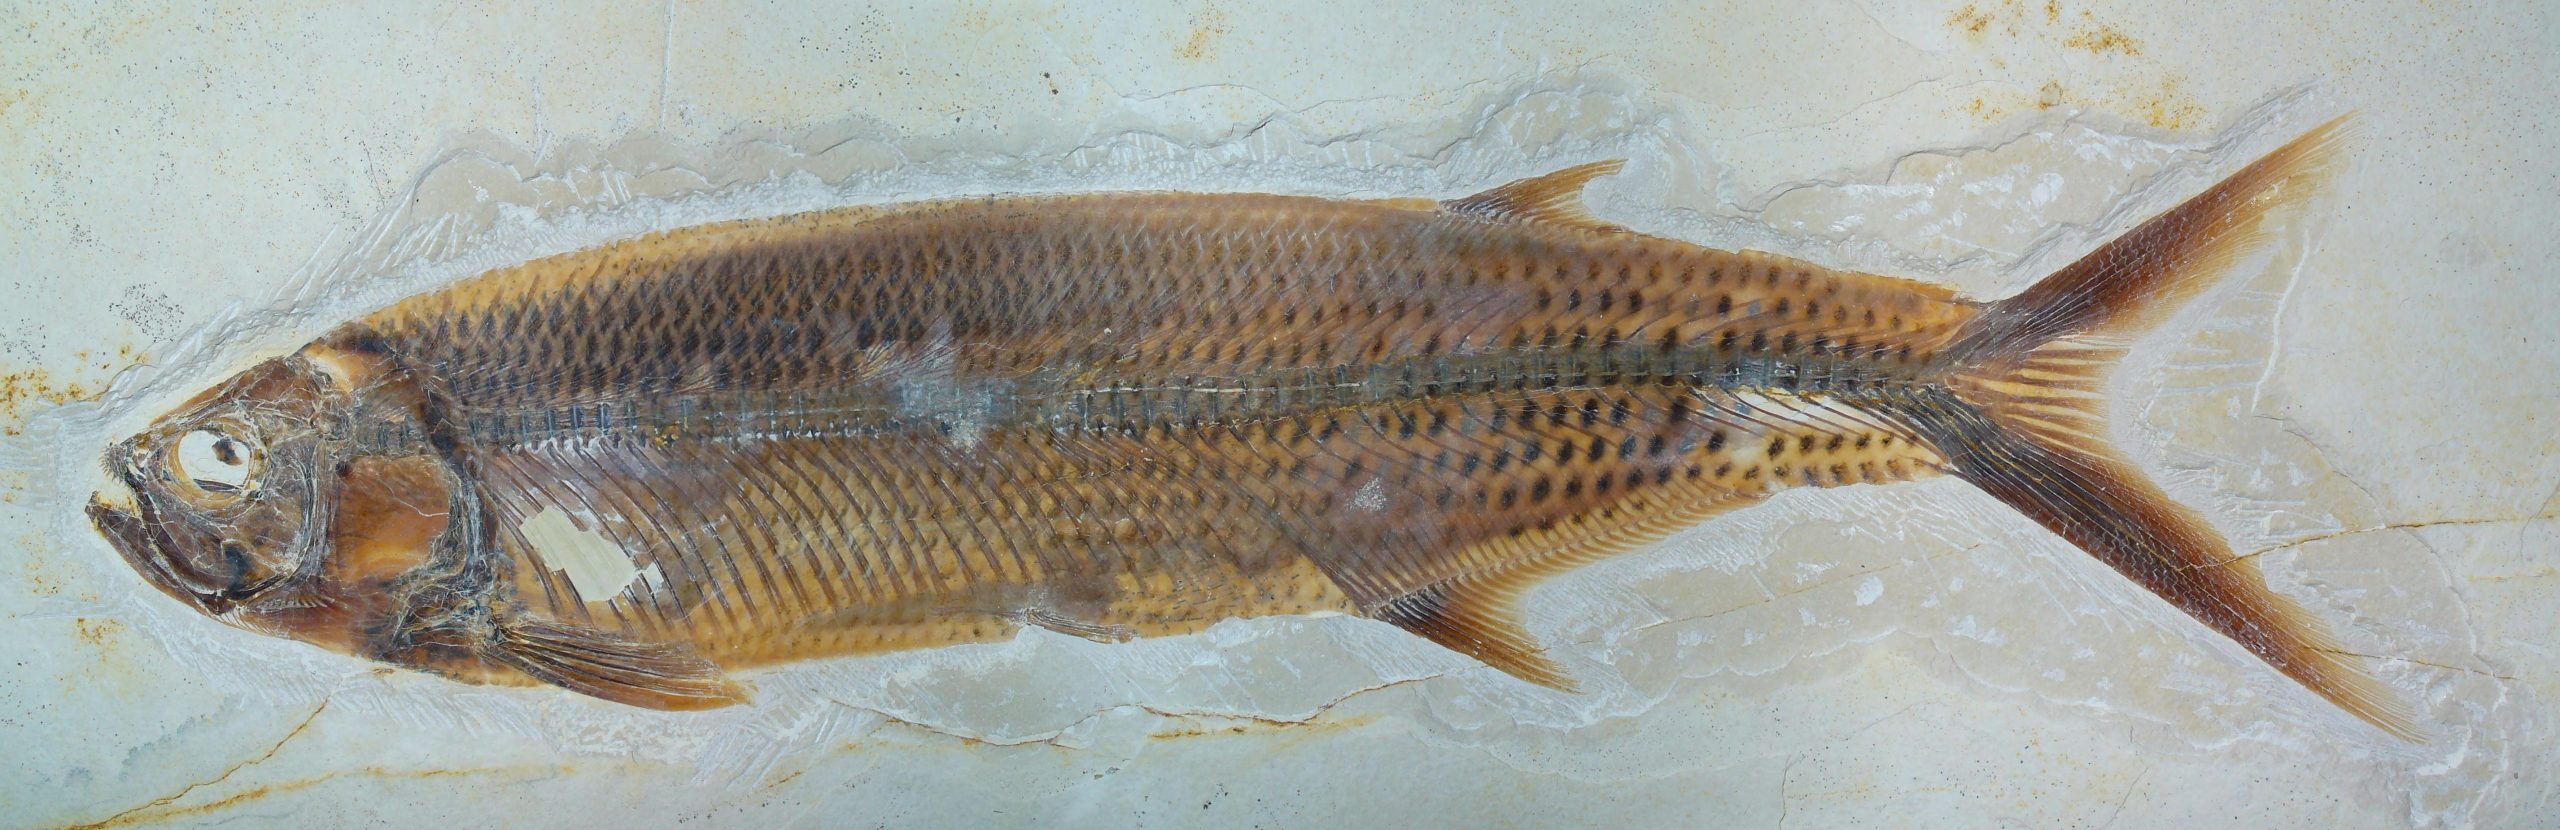 A photograph of a fossilized fish.